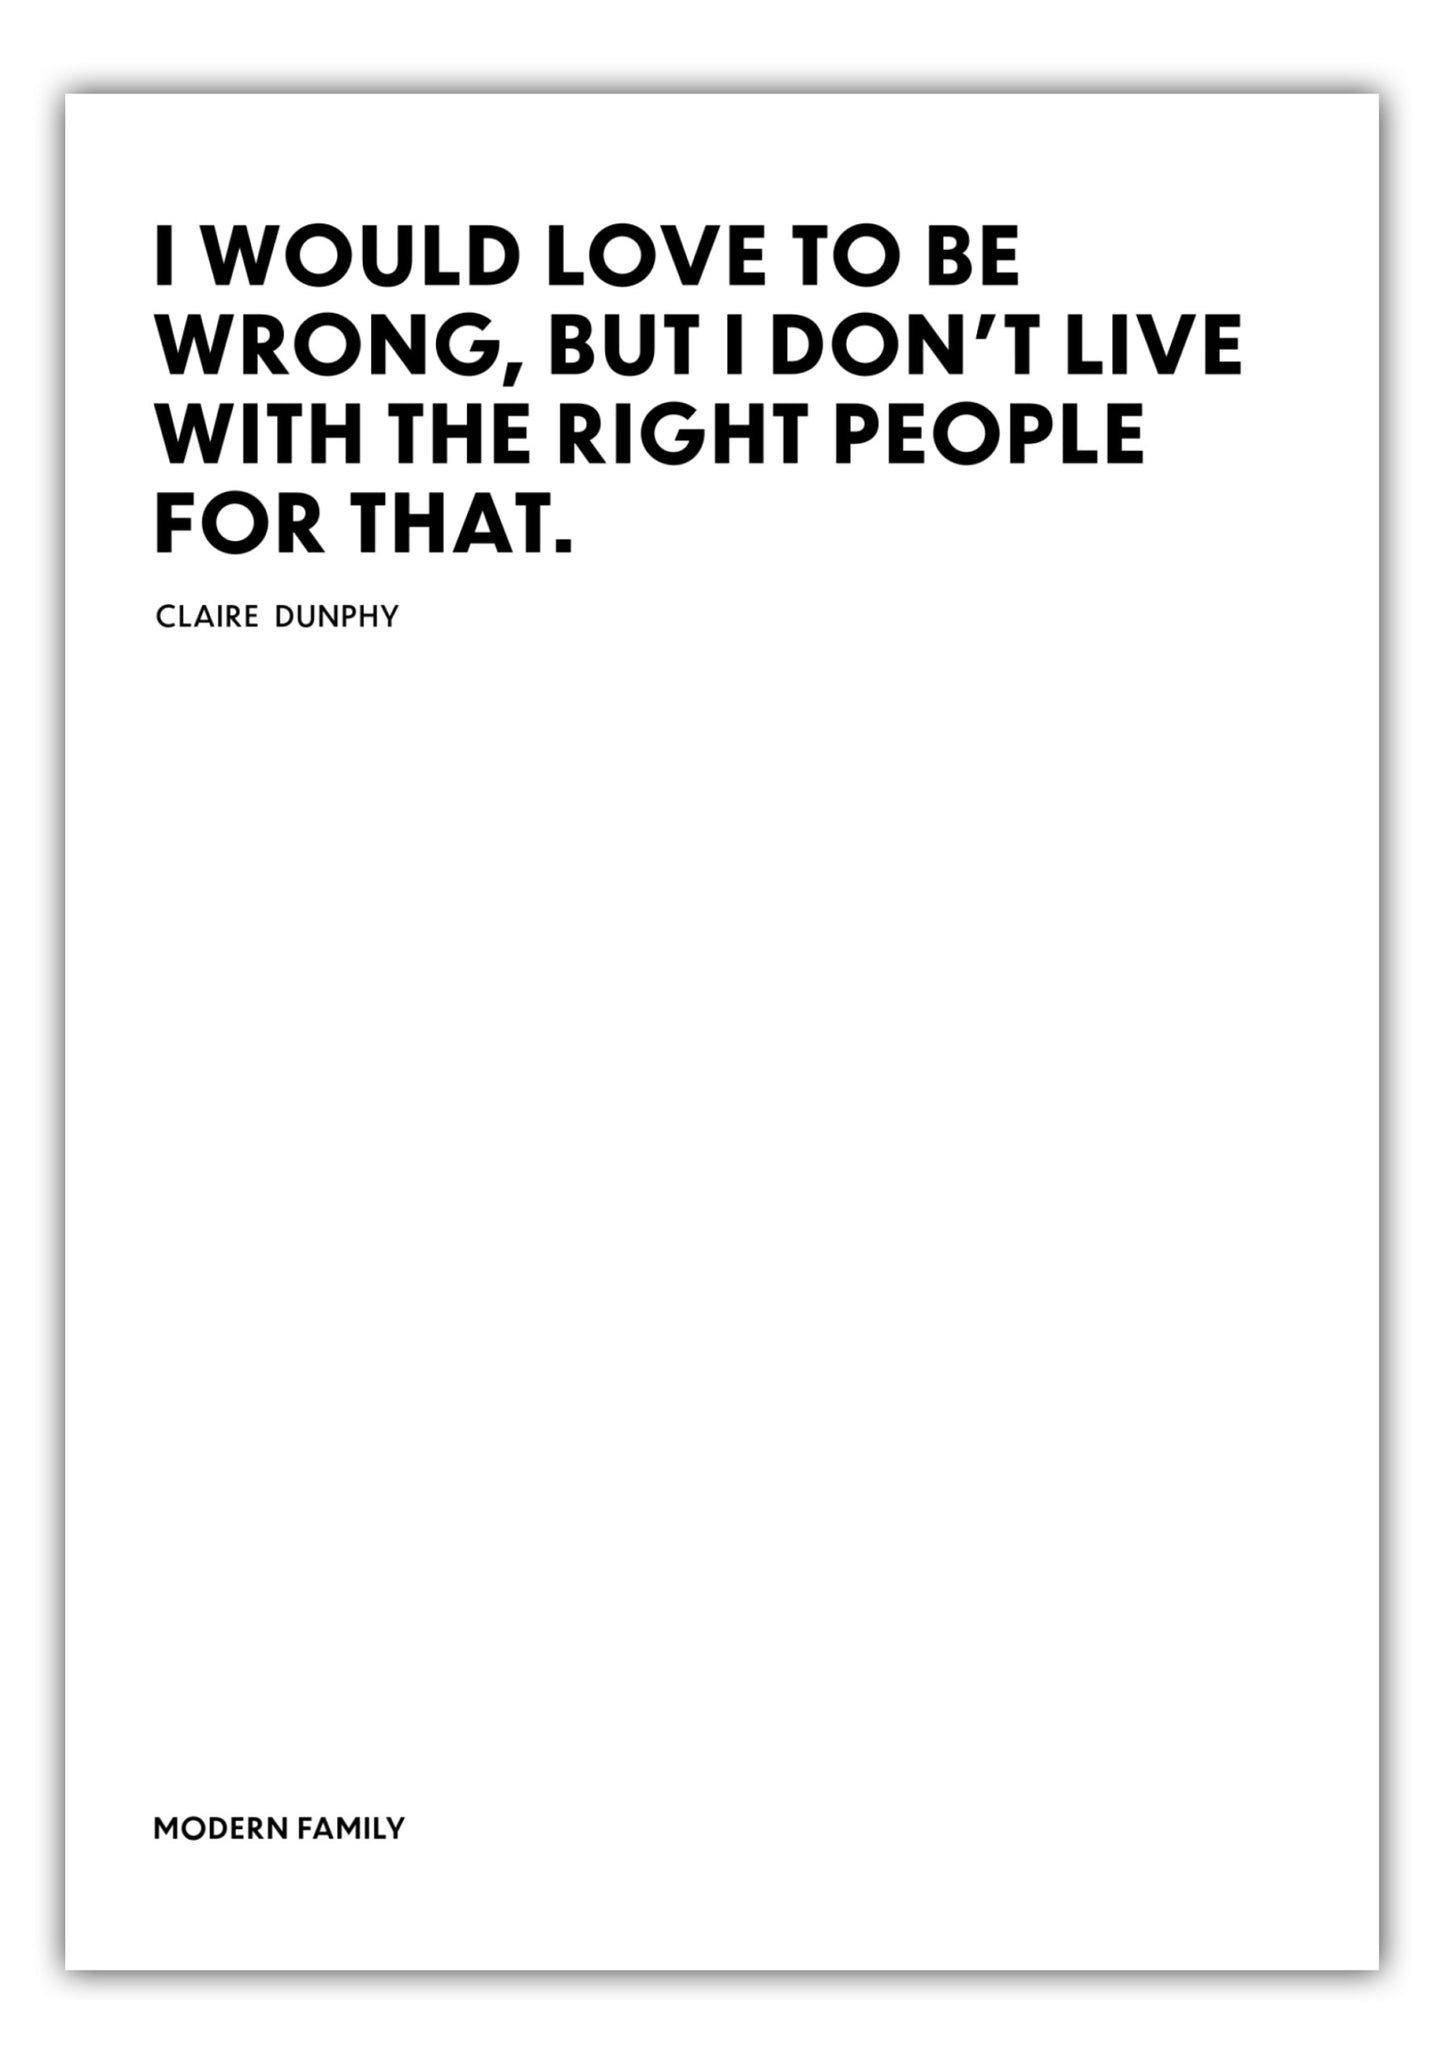 Poster I would love to be wrong, but I dont live withe the right people for that. - Claire Dunphy - Modern Family